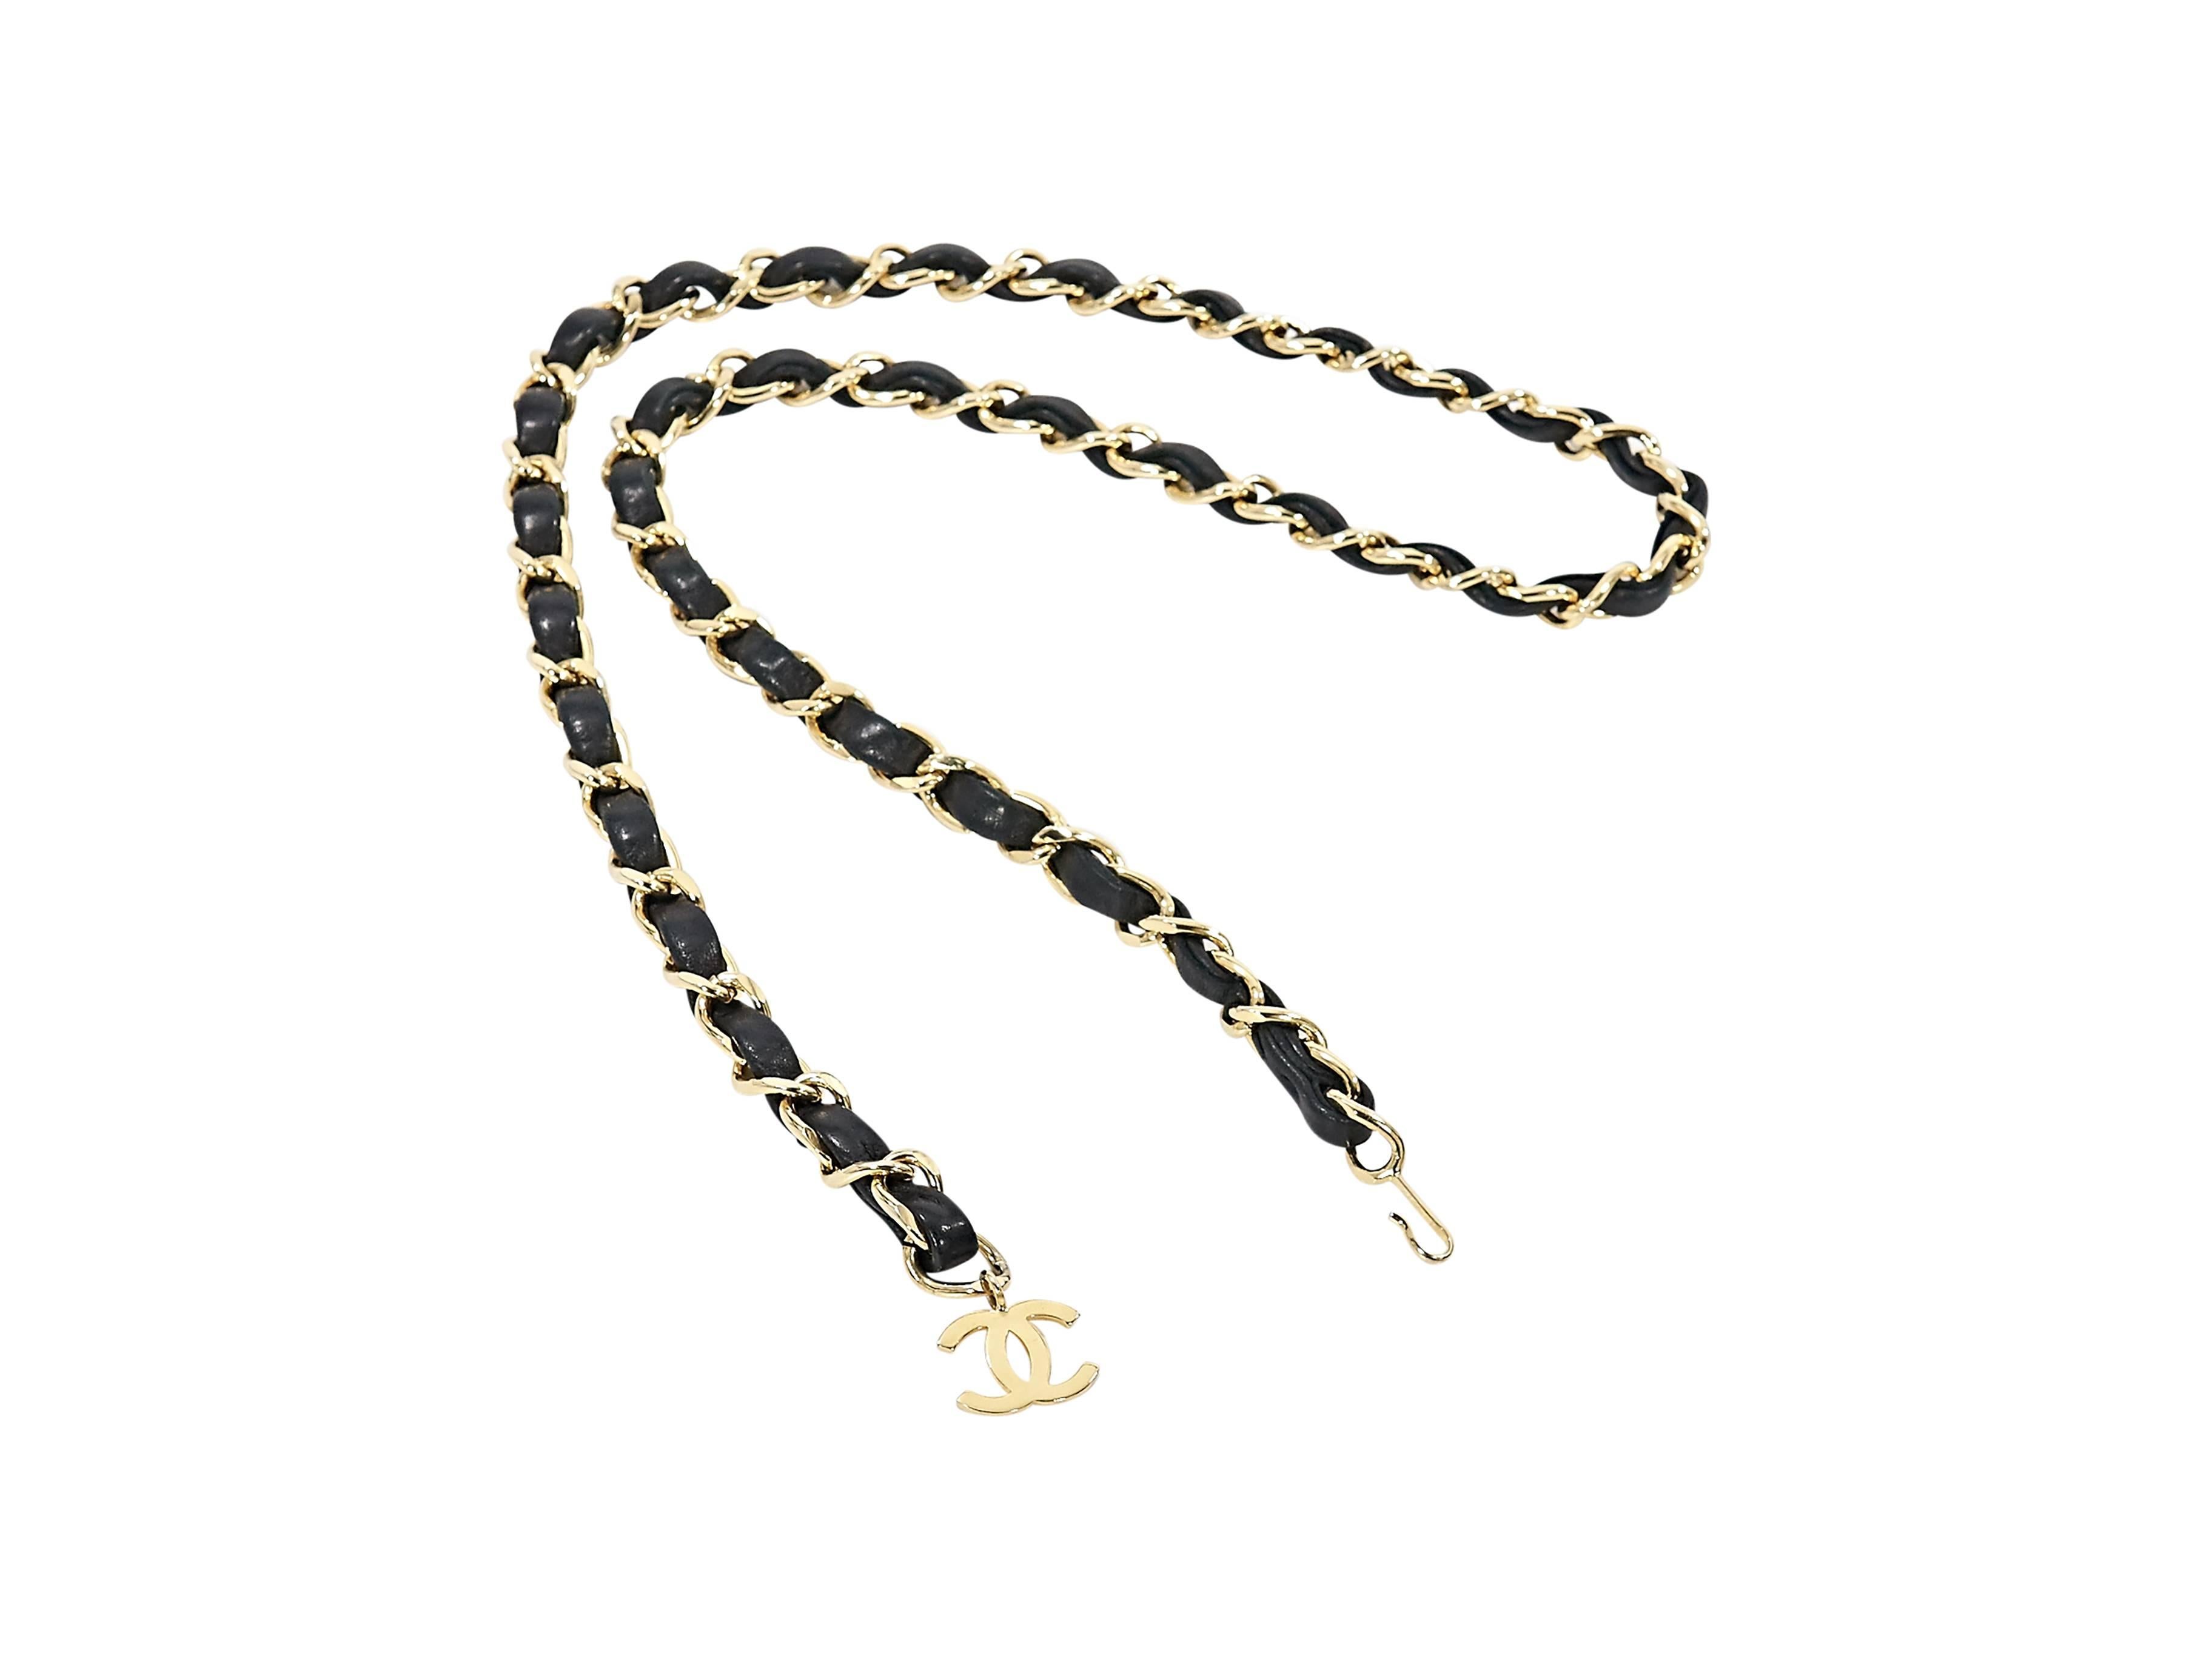 Product details: Black leather woven chain belt by Chanel. Hanging logo charm. Hook closure. 38